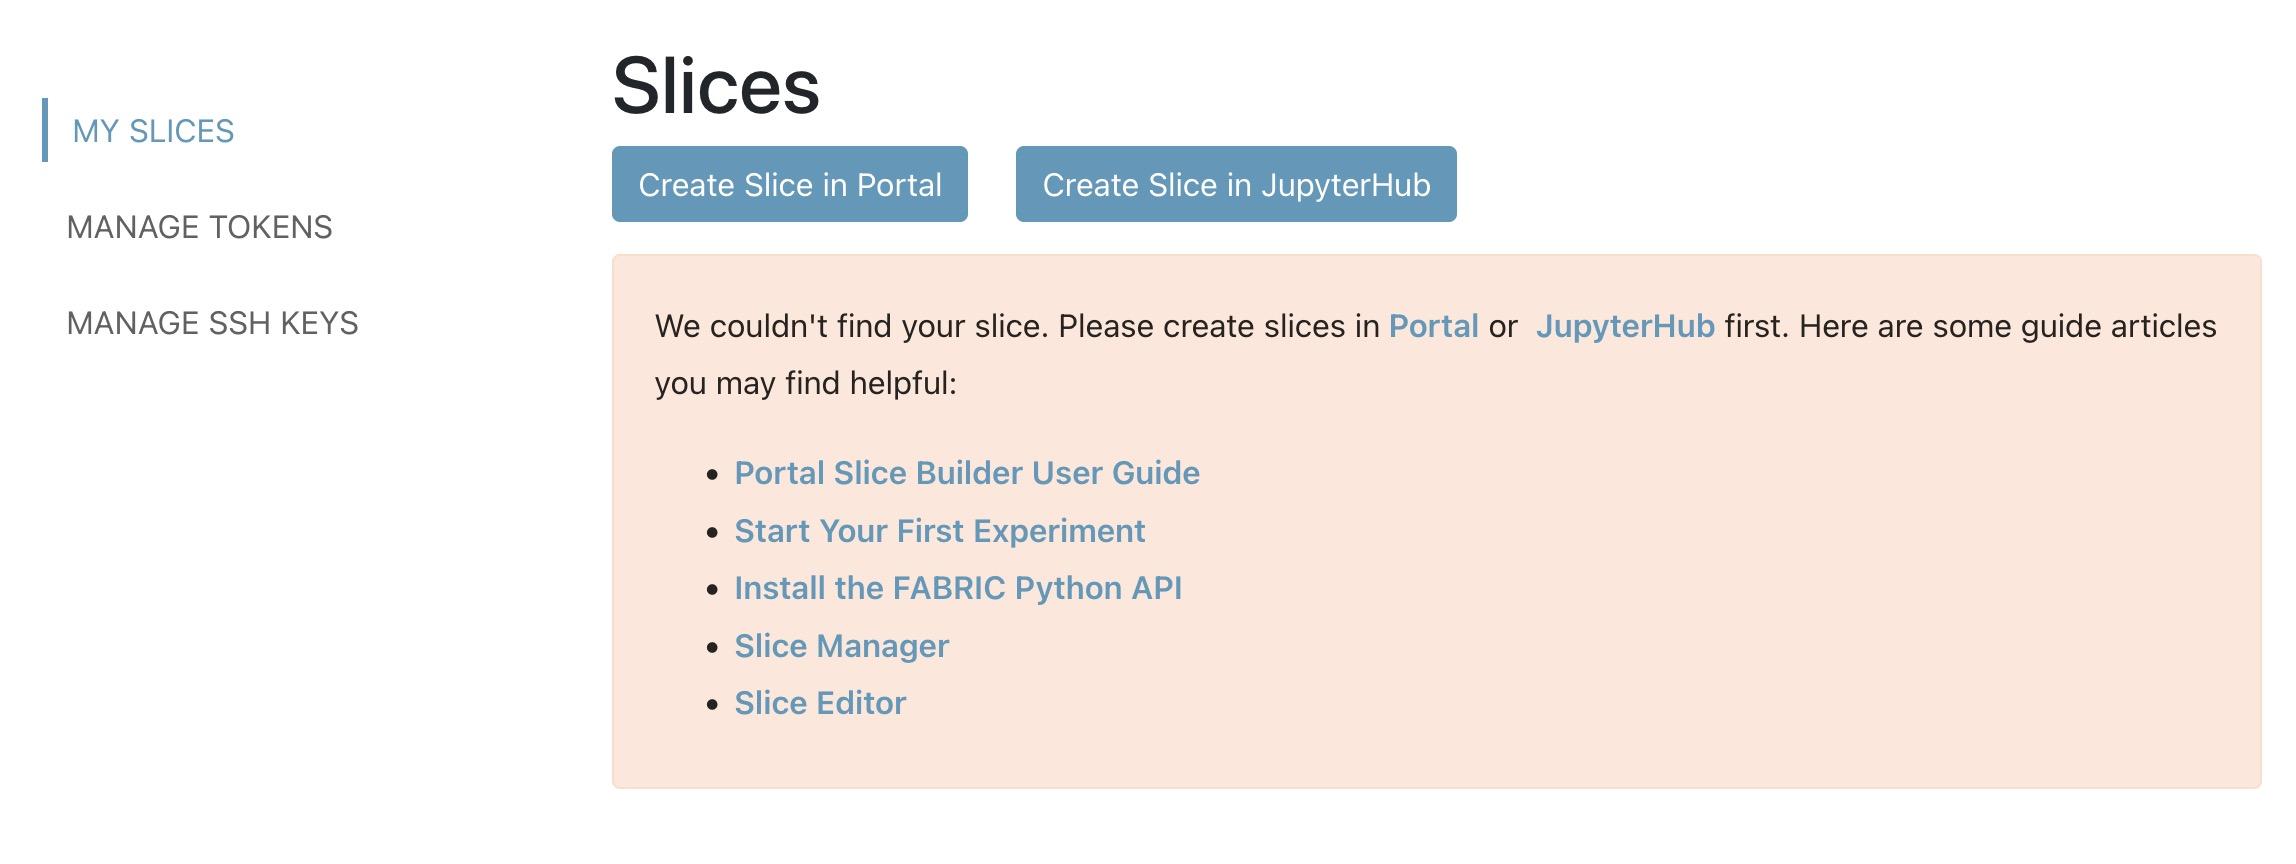 My Slices page when the user doesn't have a slice